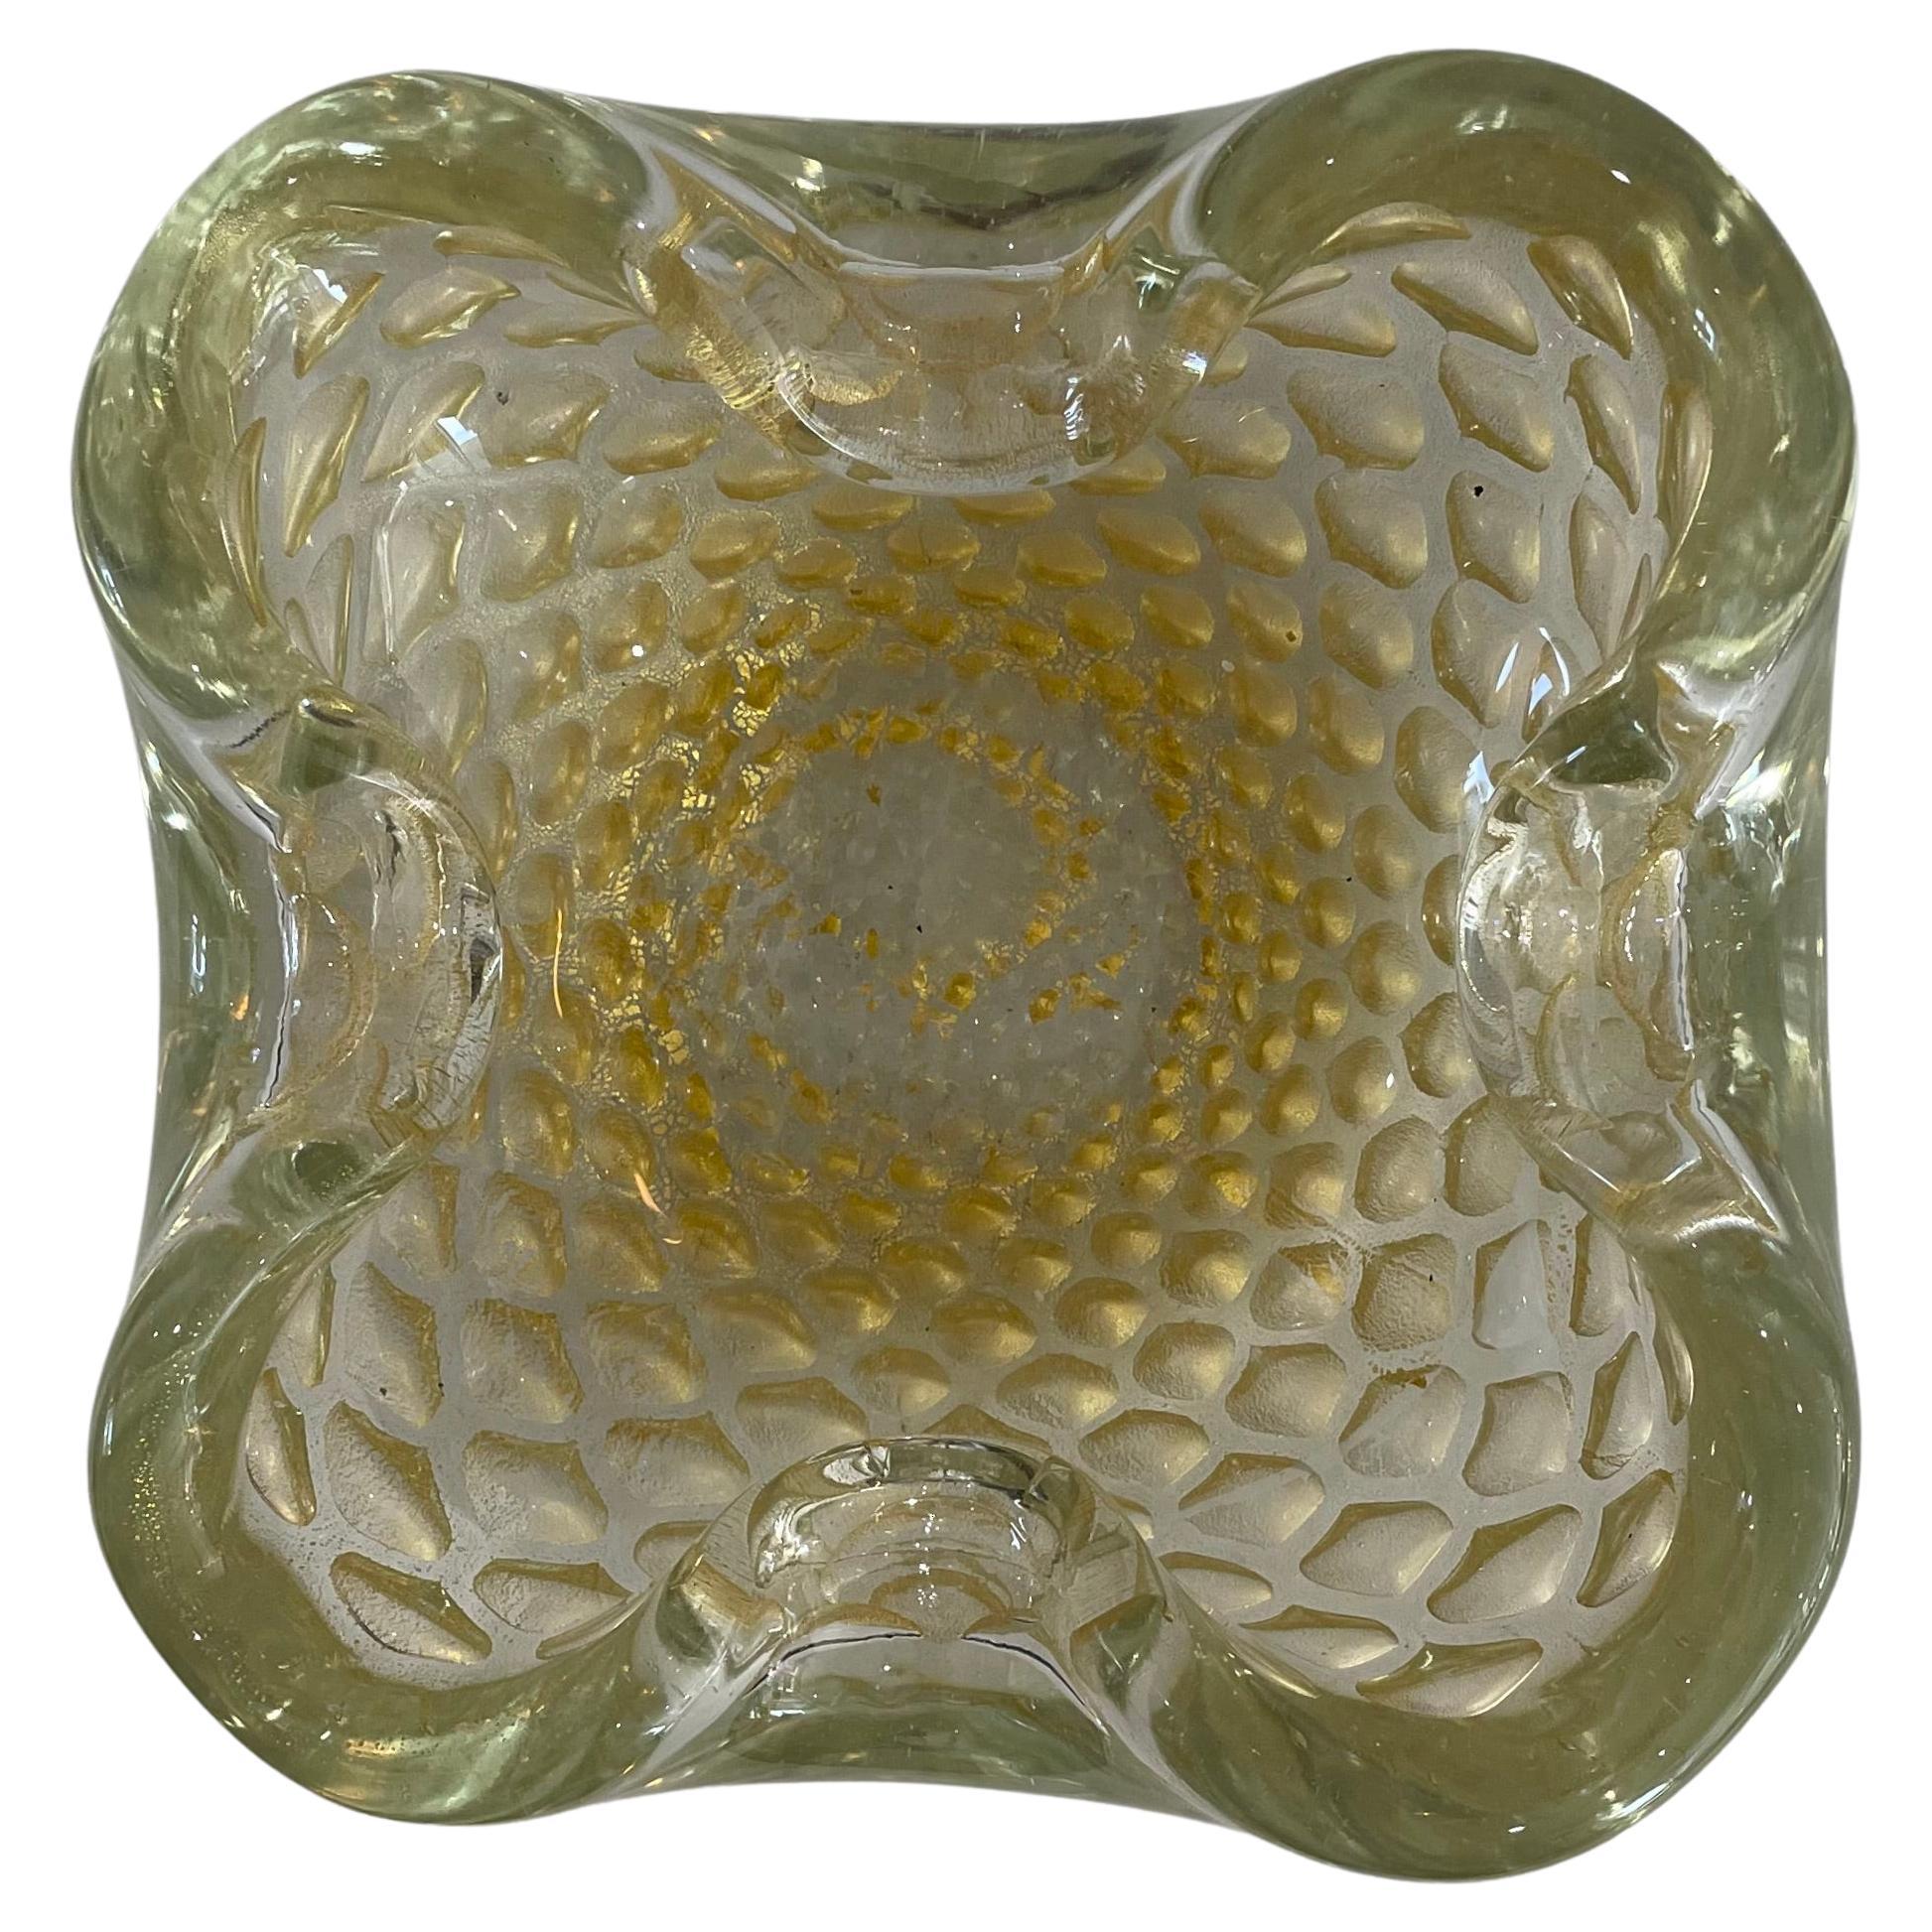 This stylish, chic and oh so verstaile piece of Murano glass can be used to hold a votive candle, potpurri, candies, lemon slices, etc., and a variety of other items. 

Note: The piece dates to the 1960s-1970s.